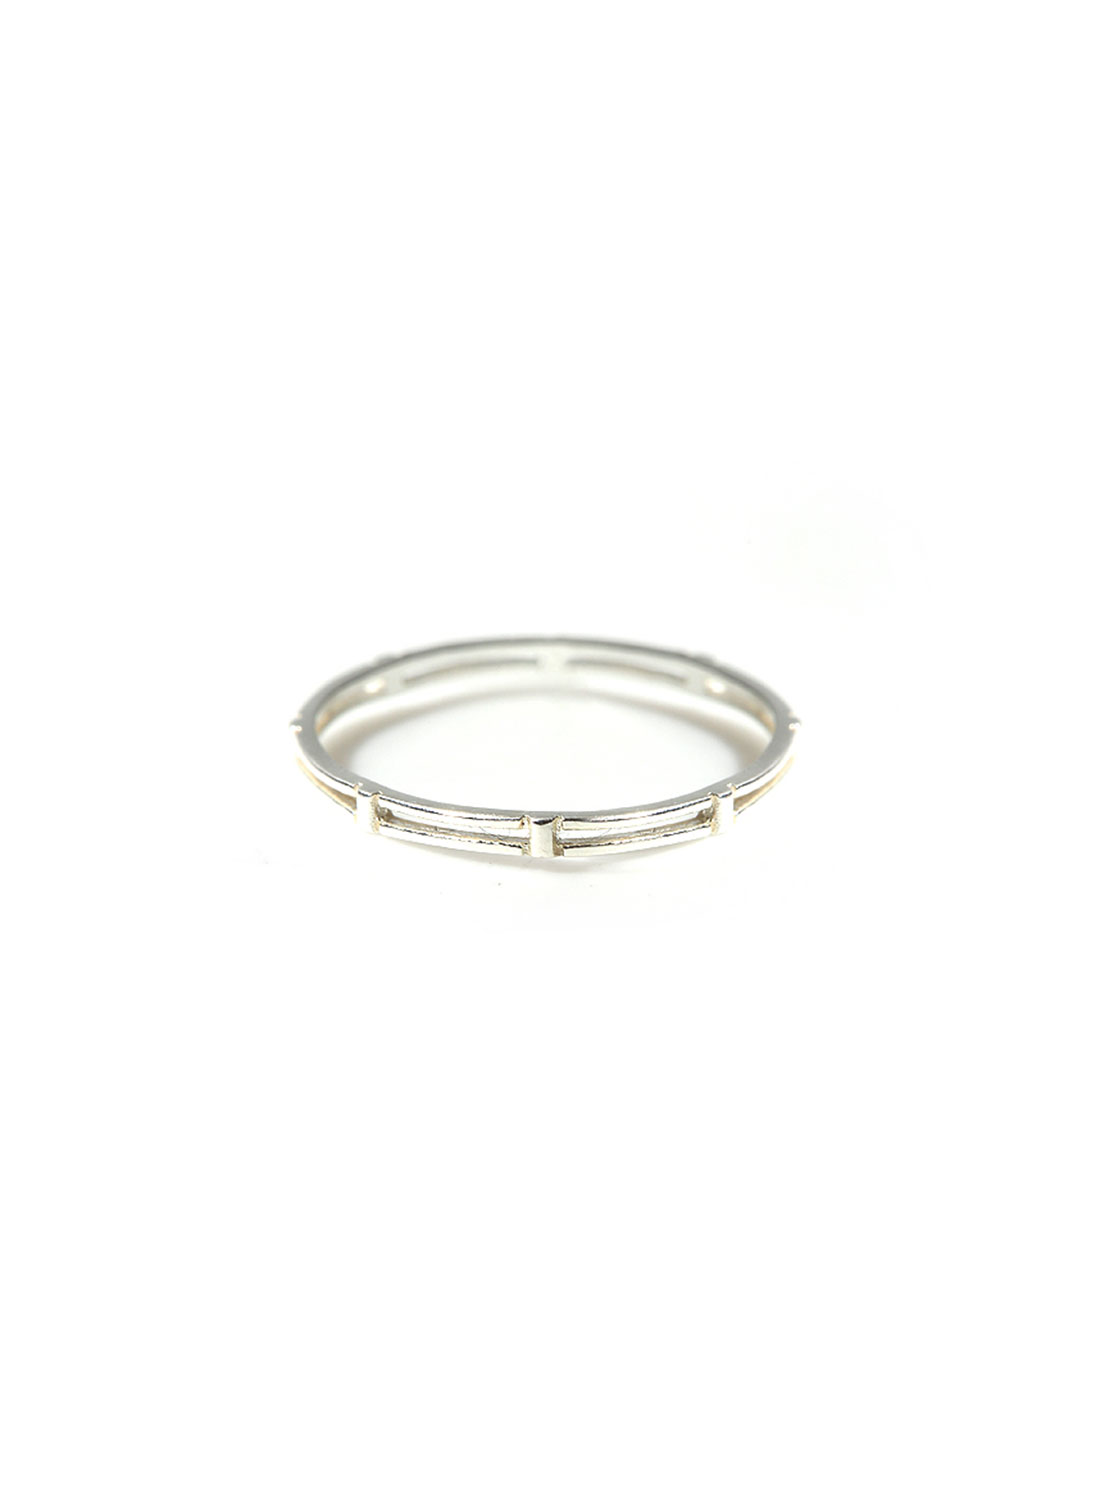 [Silver925]MOODY RING 무디 링